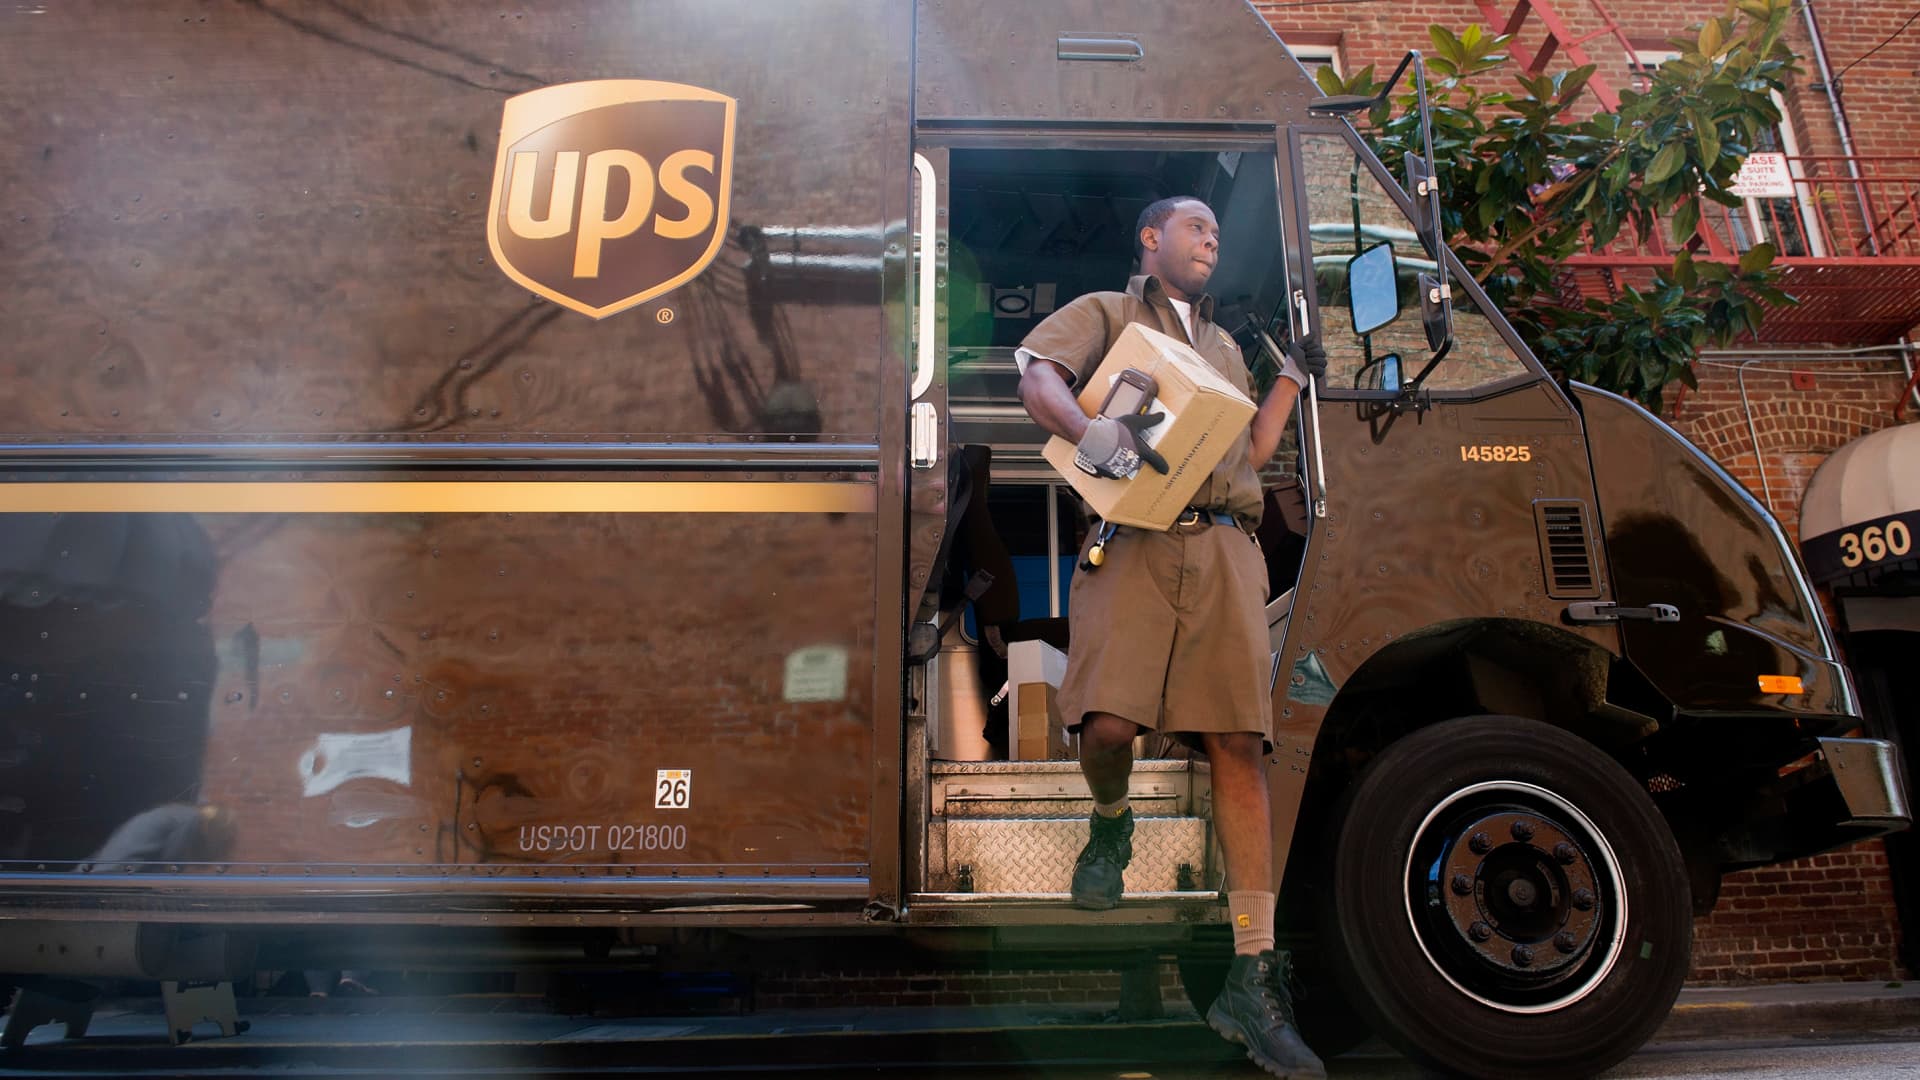 UPS workers approve massive new labor deal with big raises